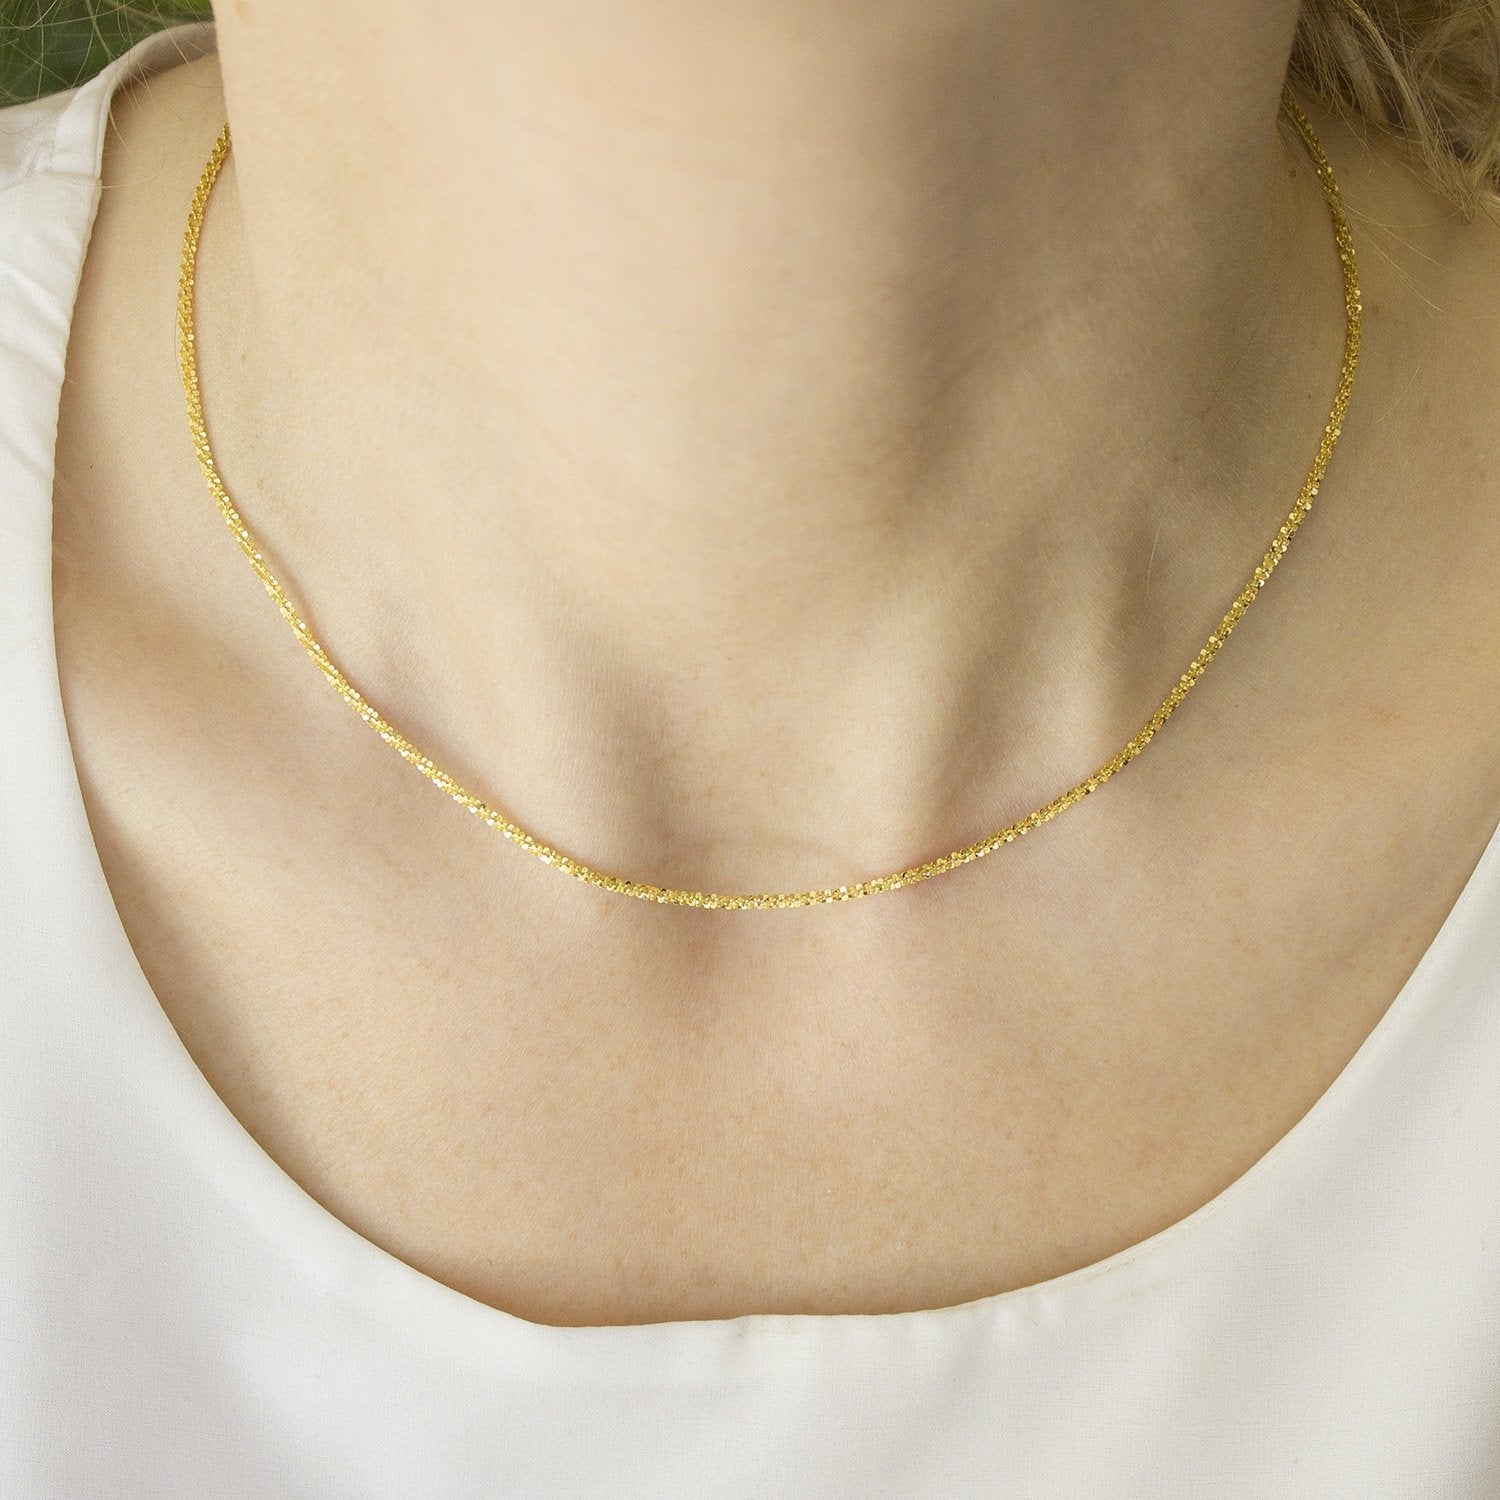 14K Yellow Gold 1.5mm Sparkle Chain